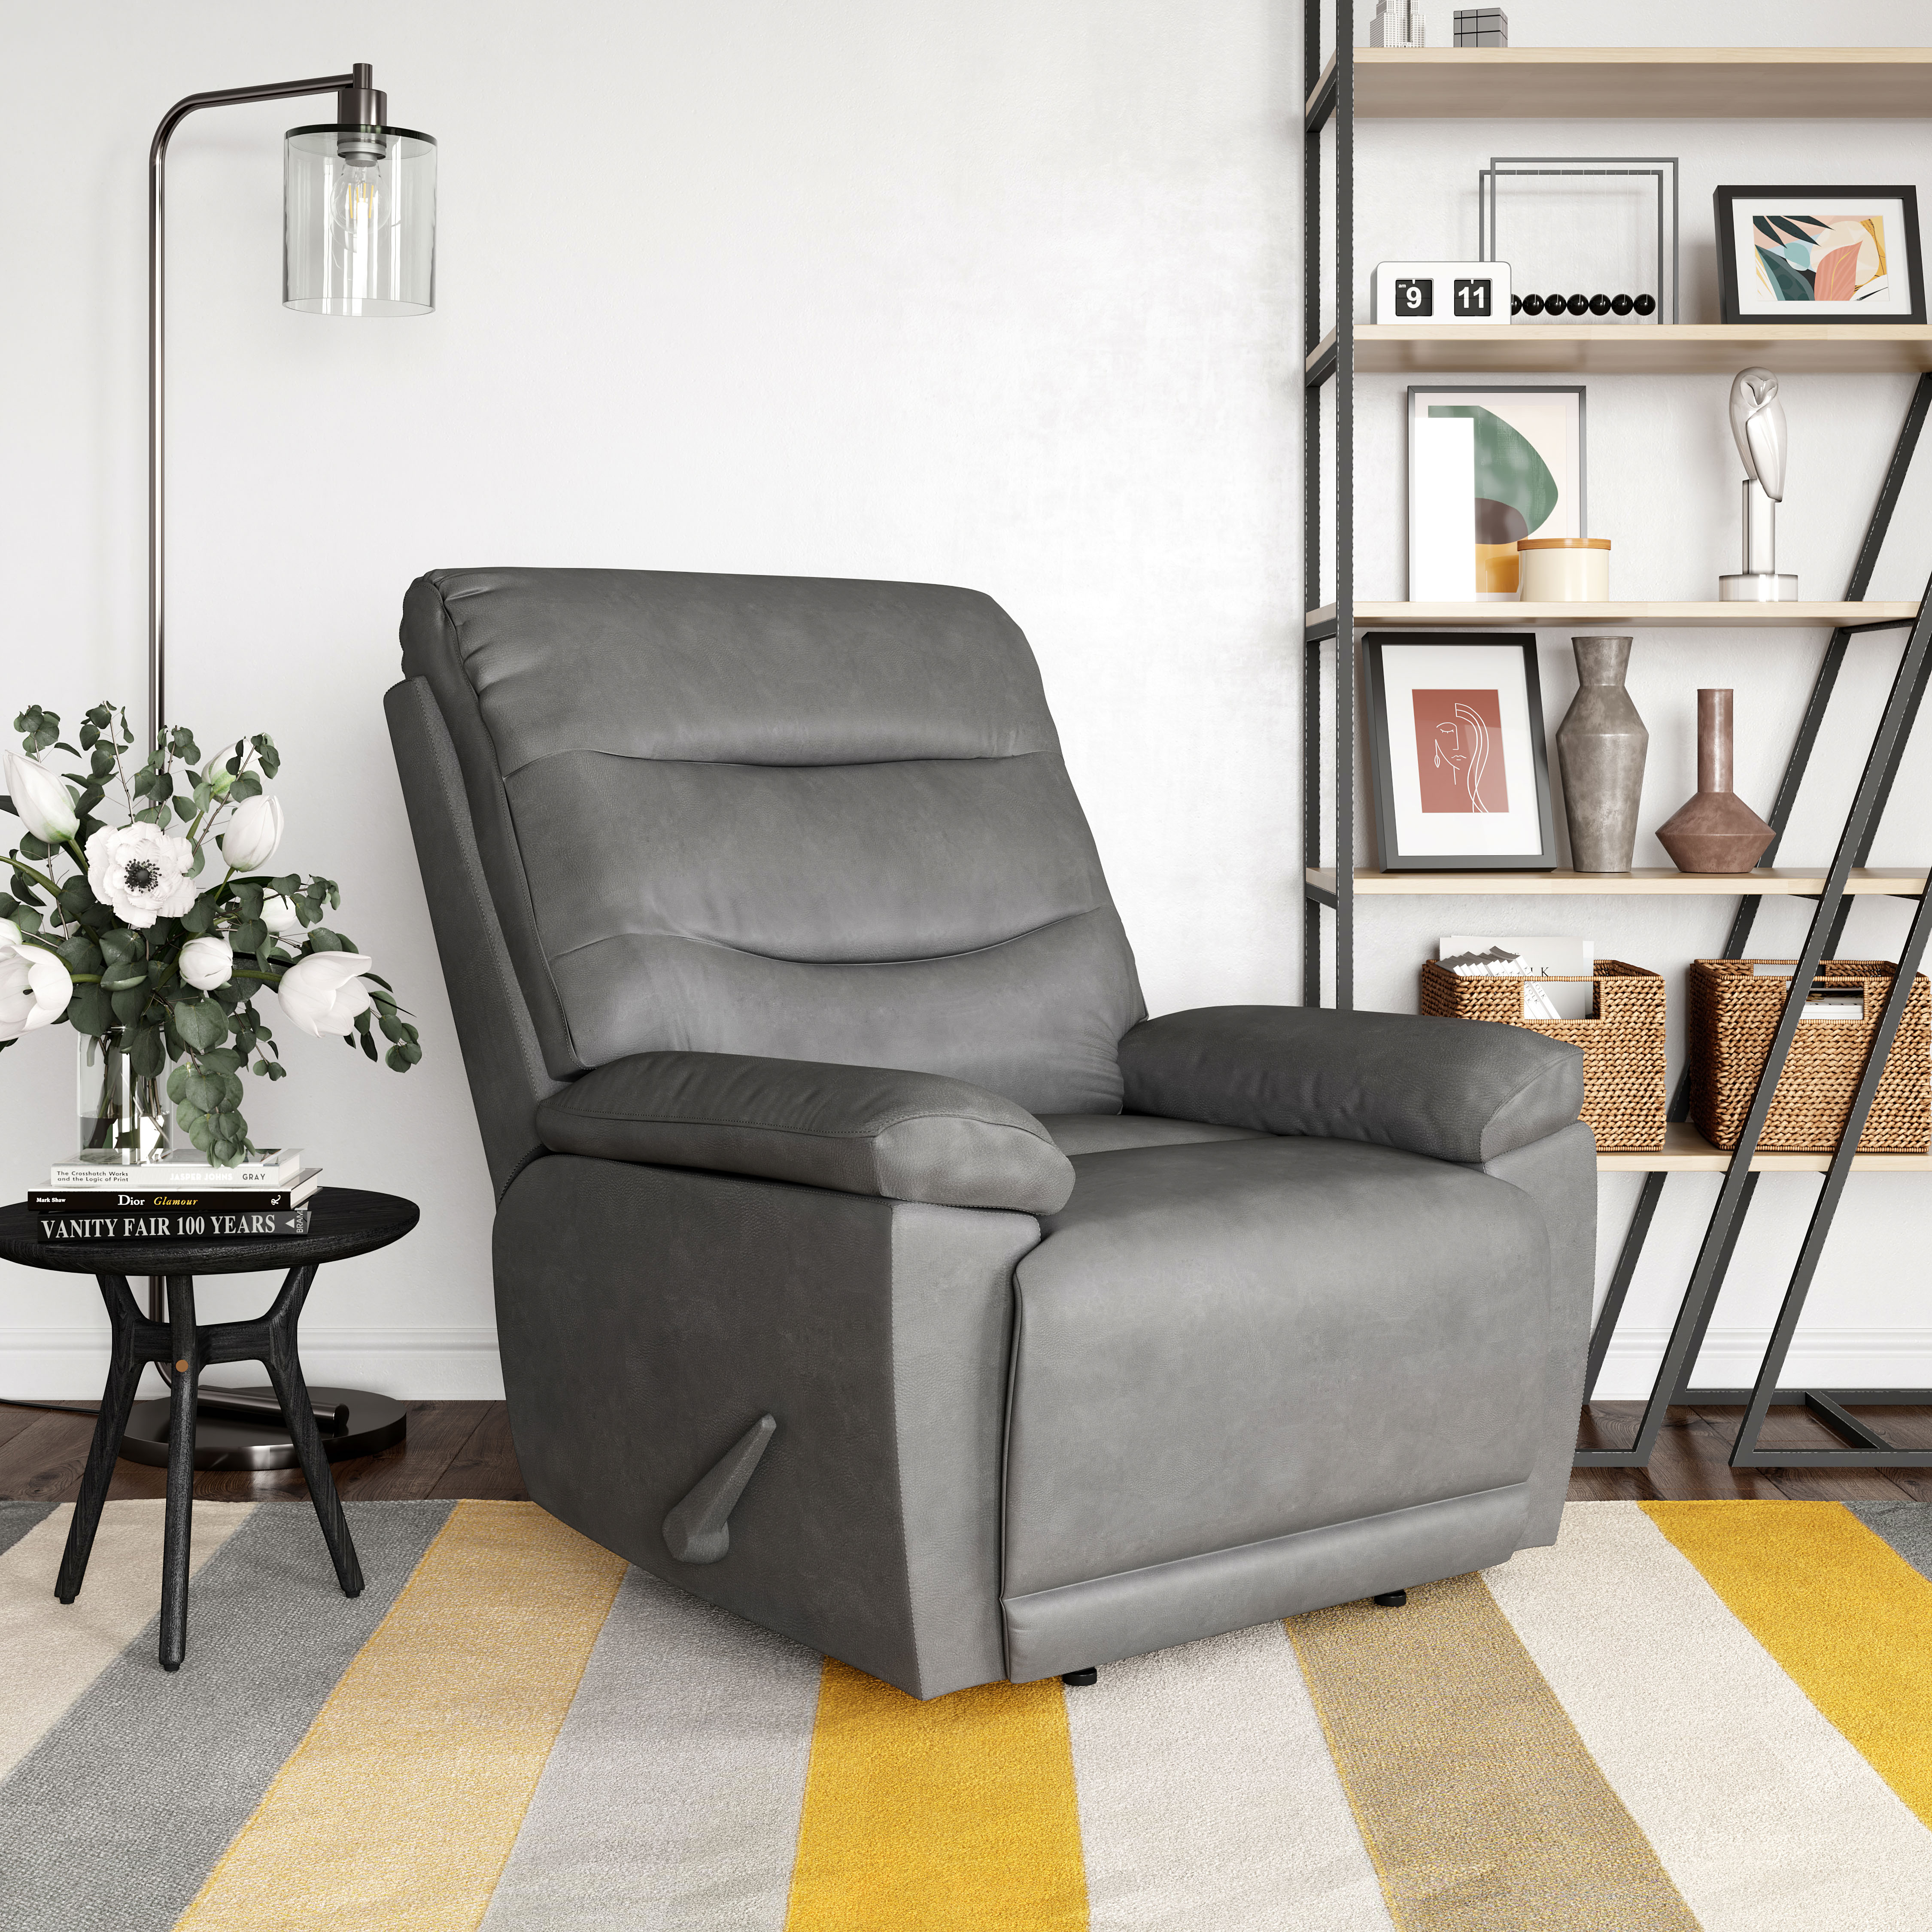 Relax-a-Lounger Lincoln Manual Oversized Recliner, Gray Faux Leather - image 1 of 13